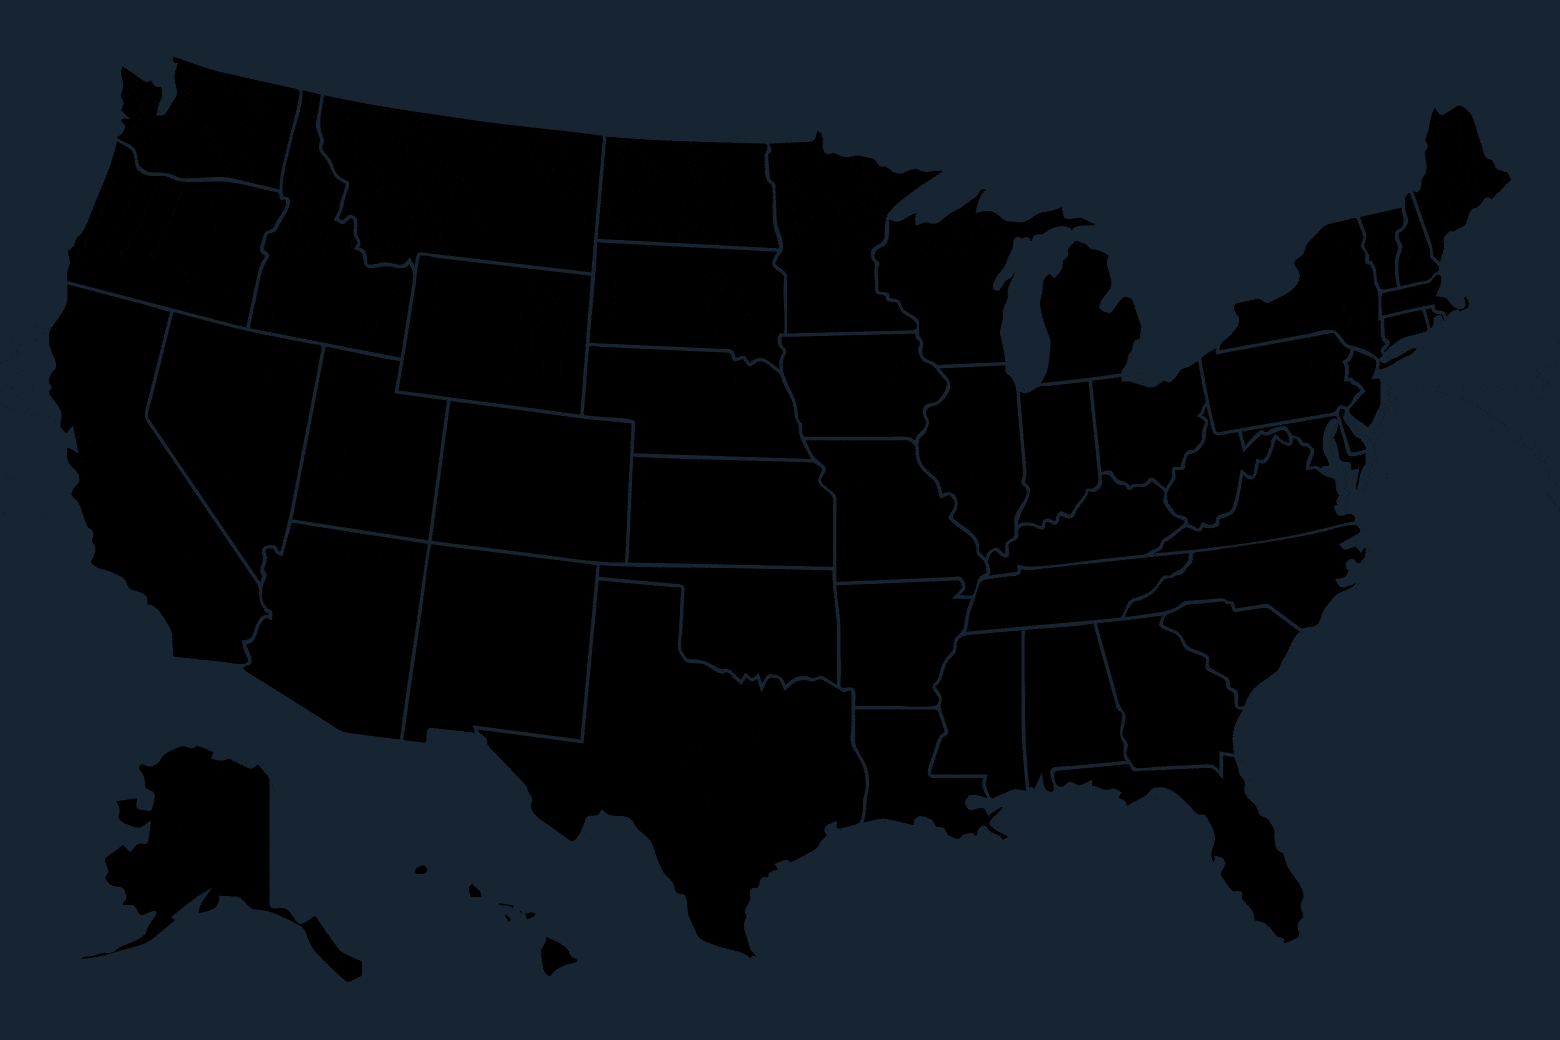 Animation of a map of the U.S. with lights flickering on in Georgia and then in all the other states